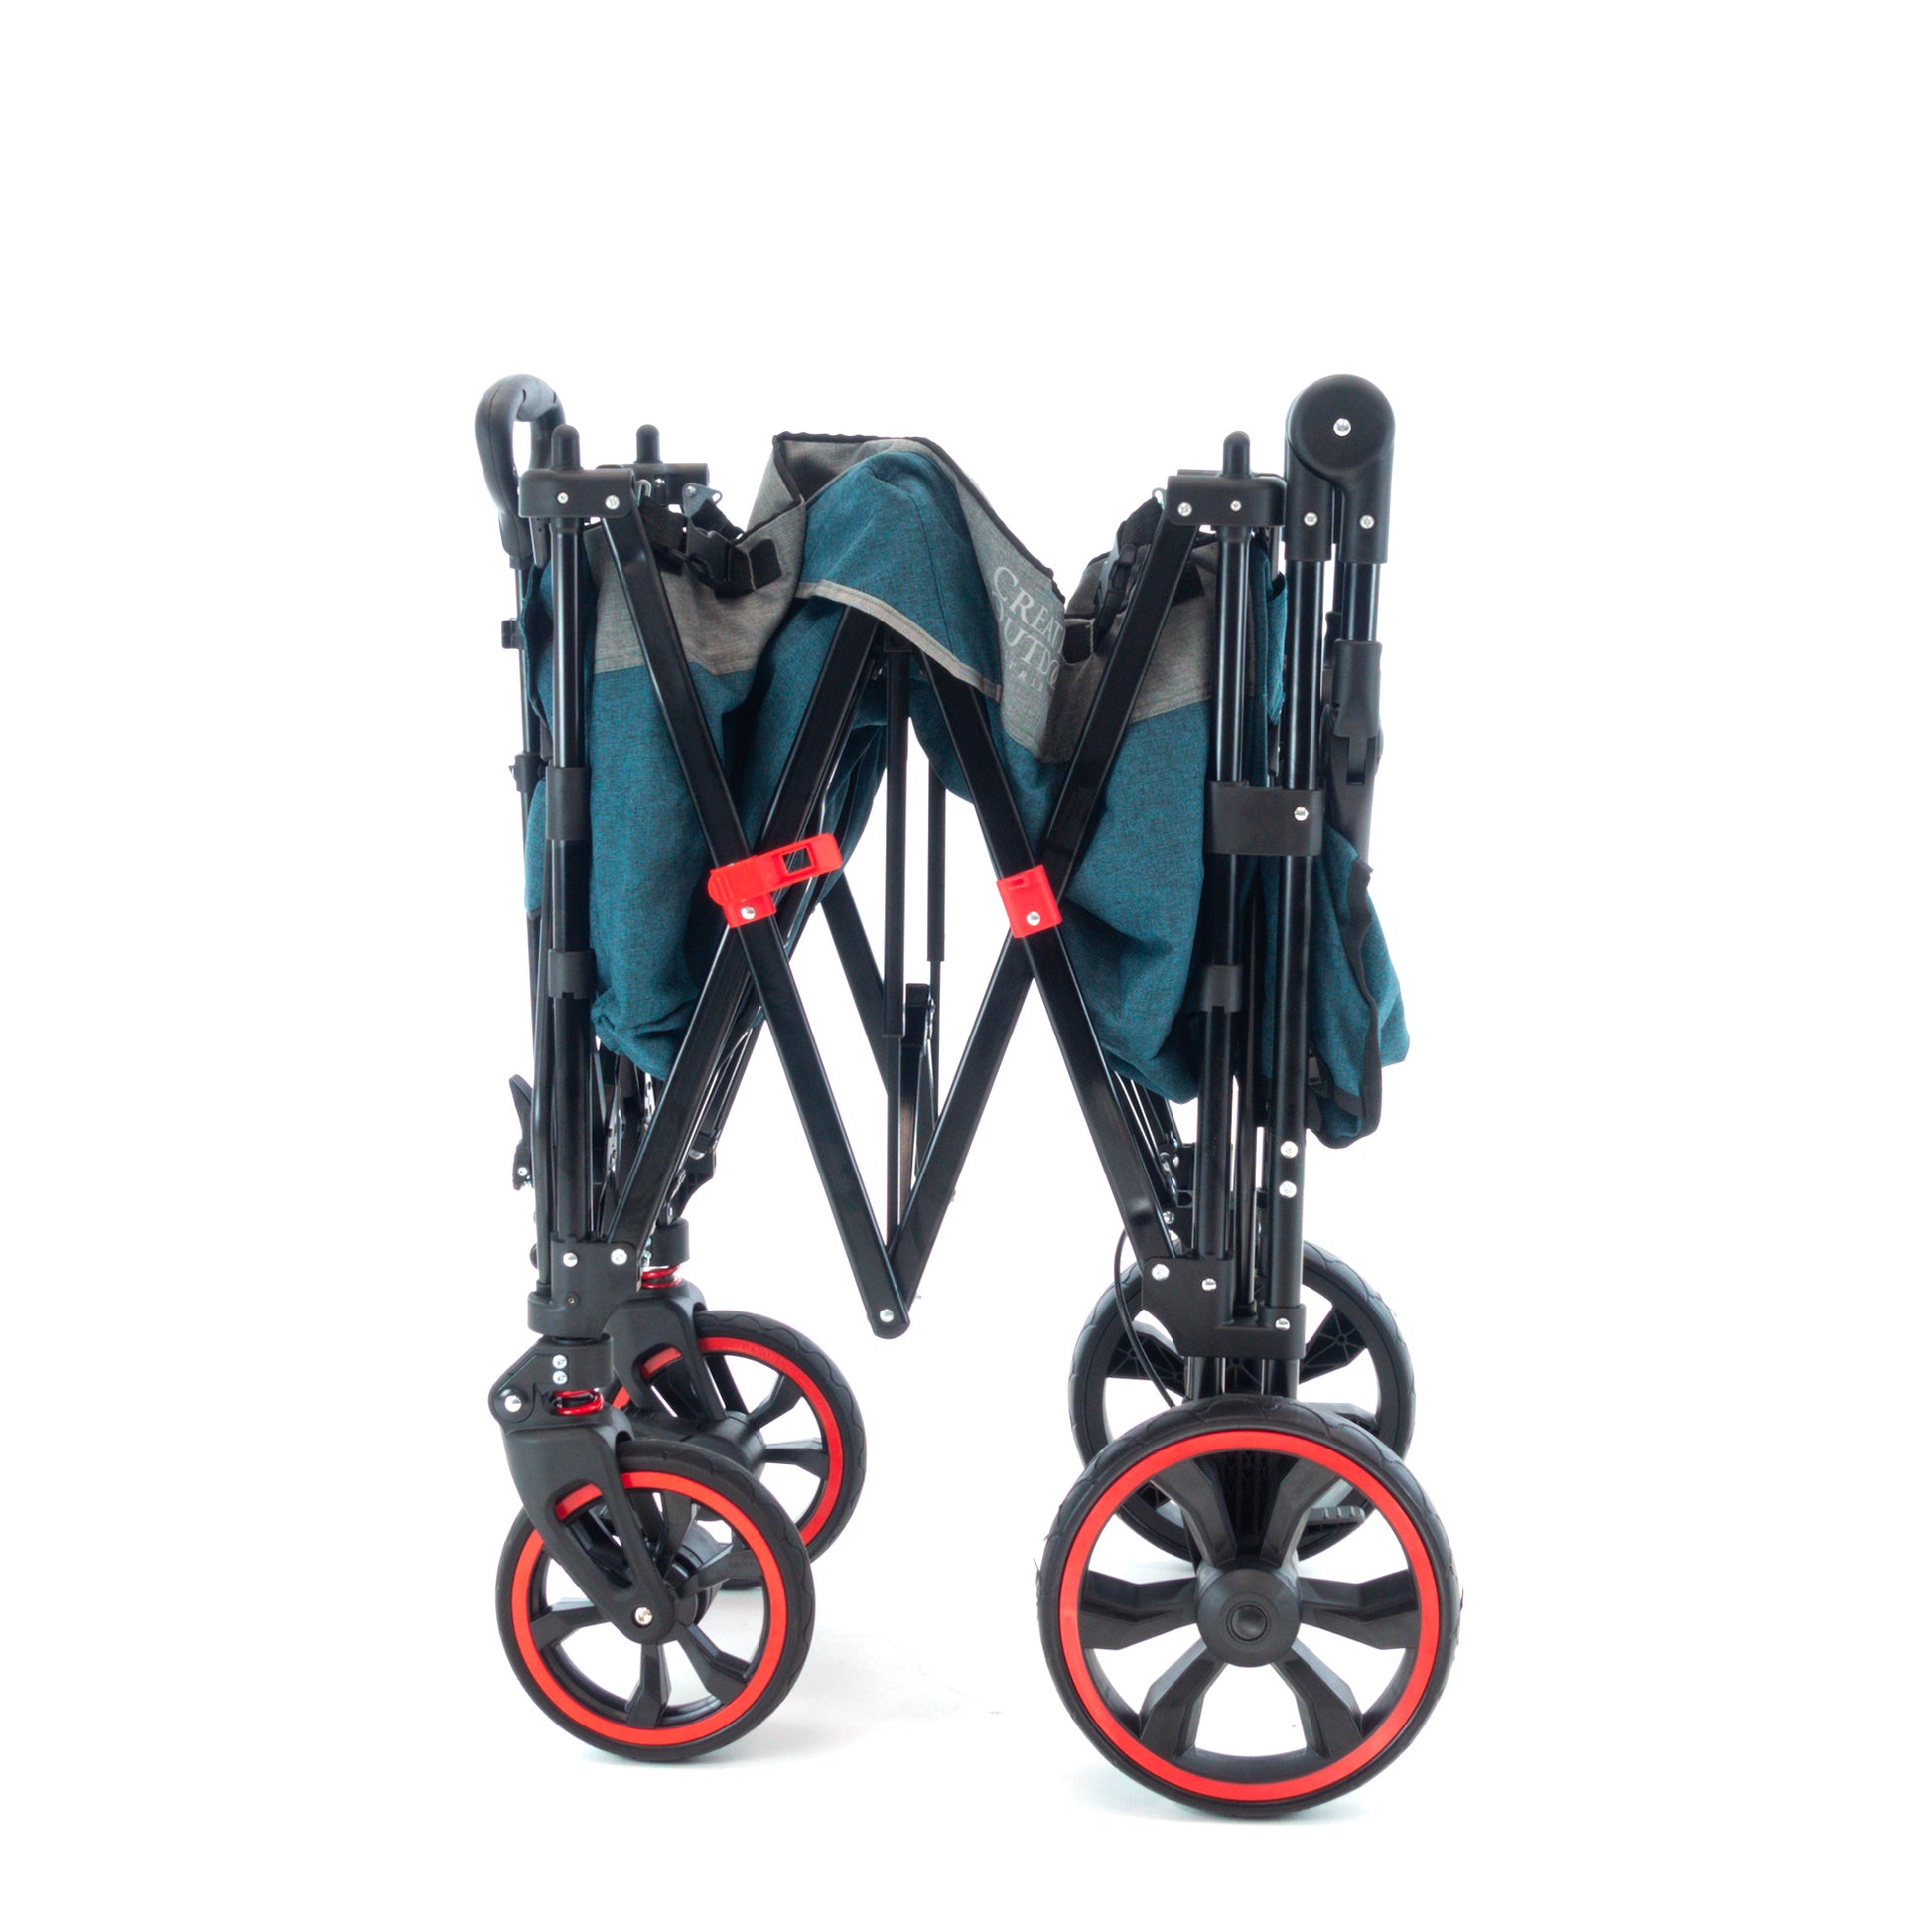 push-pull-folding-stroller-wagon-with-canopy-teal